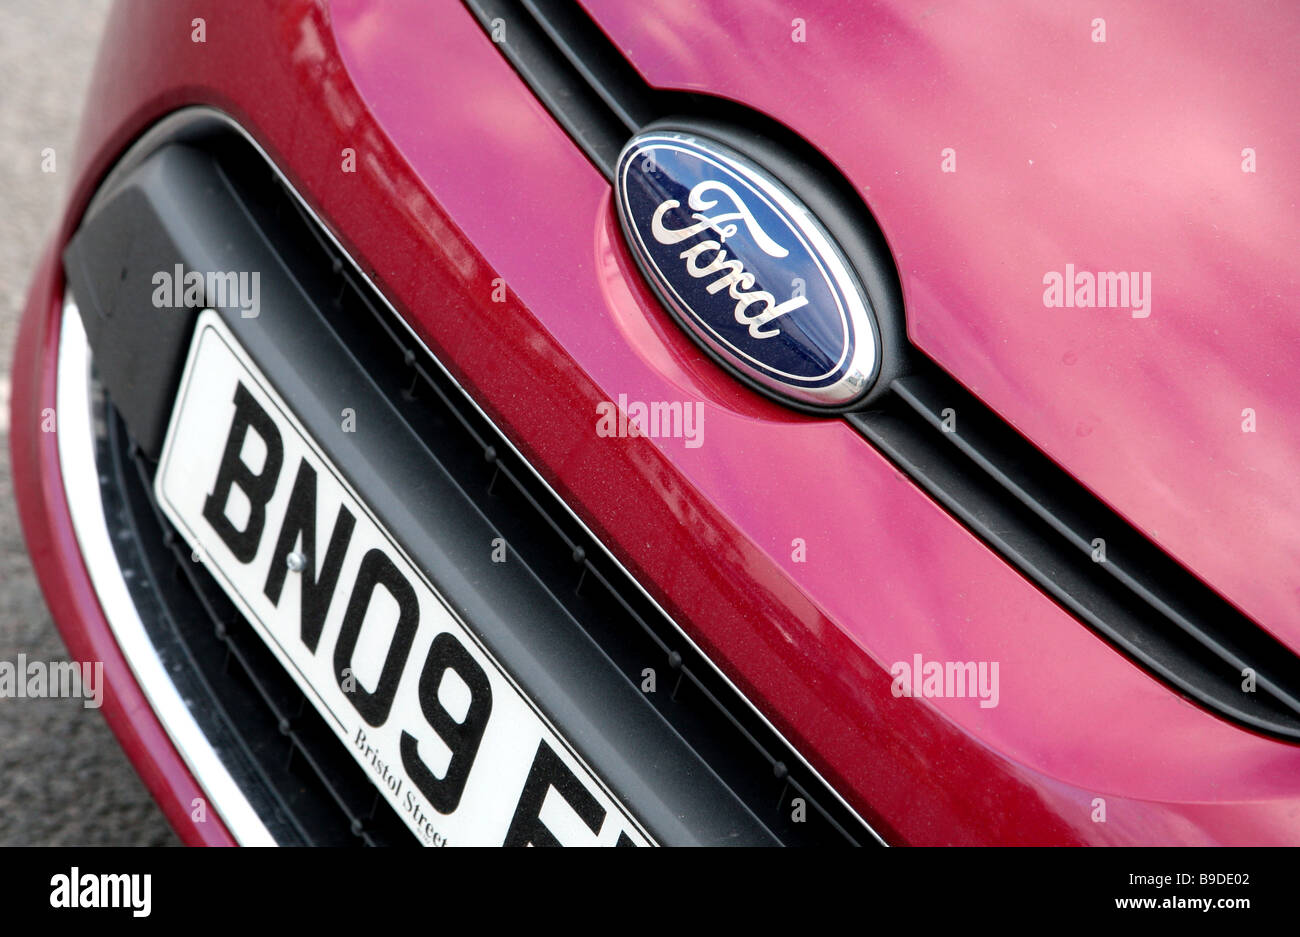 New car with 09 registration, London Stock Photo